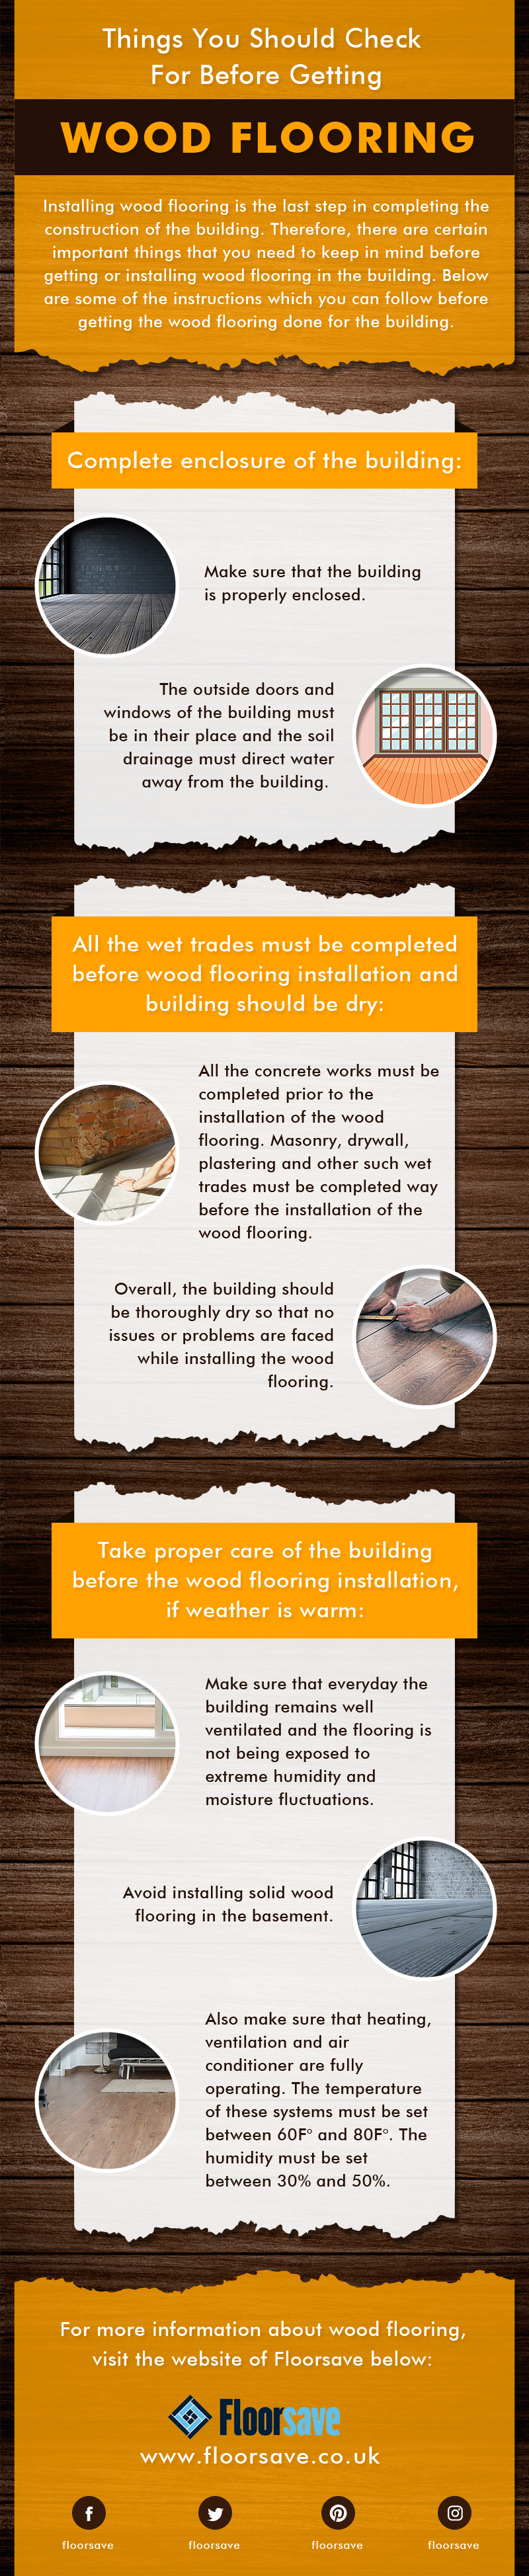 Things you should check for before getting wood flooring